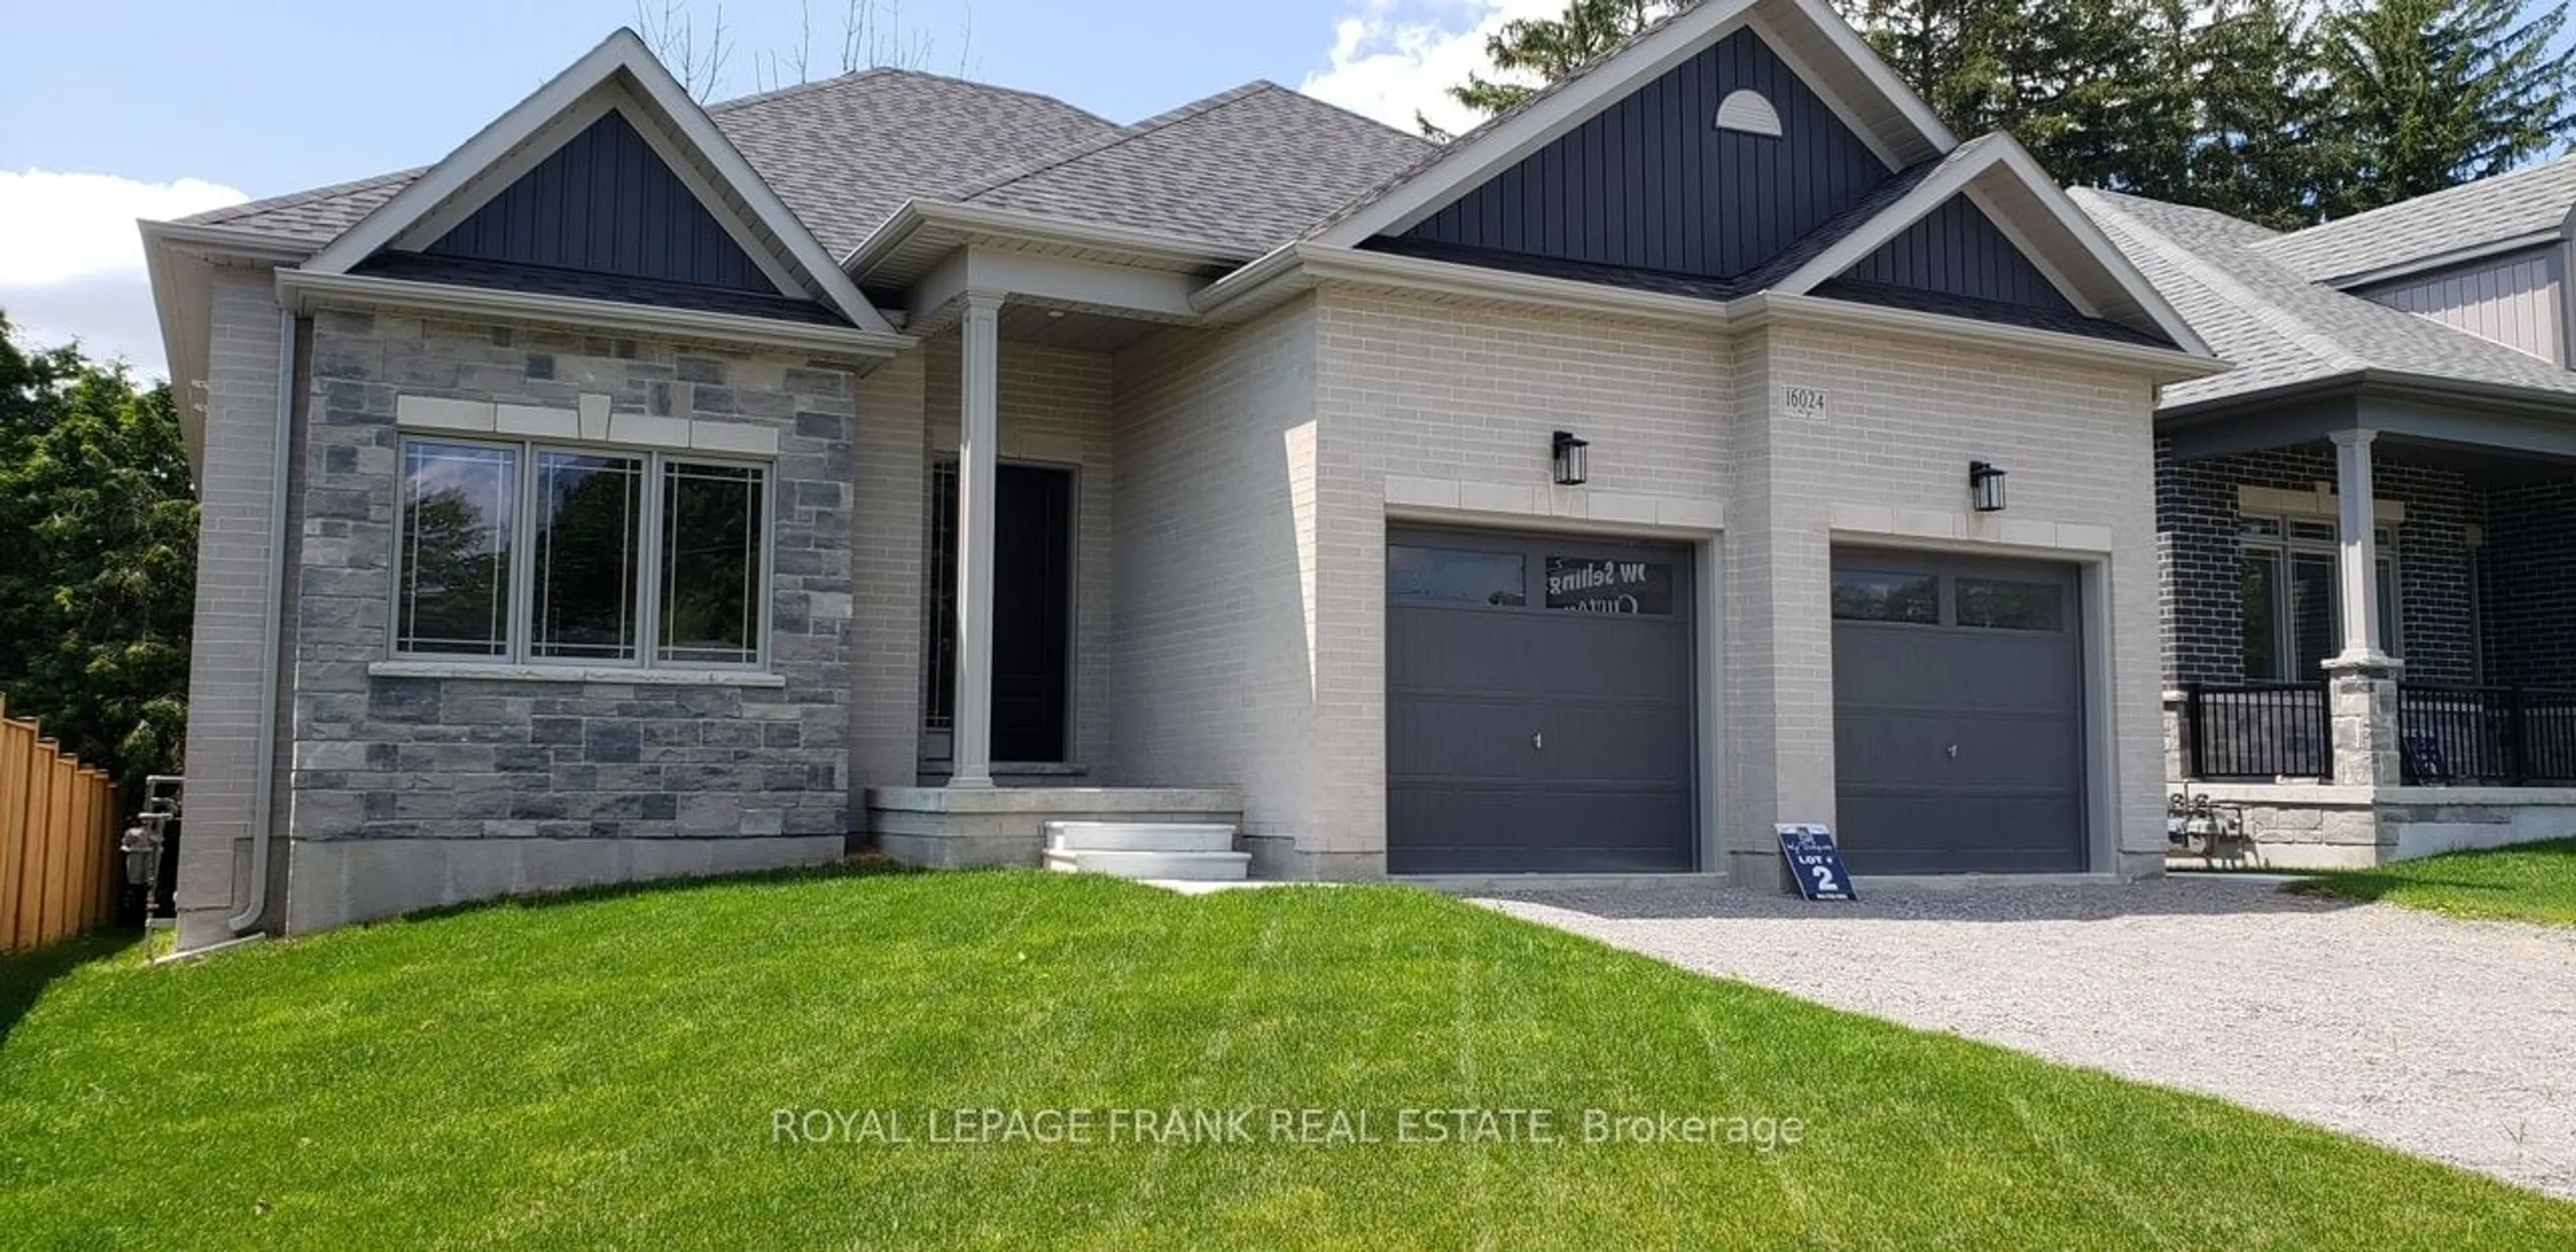 Frontside or backside of a home for 16024 Simcoe St, Scugog Ontario L9L 1S7